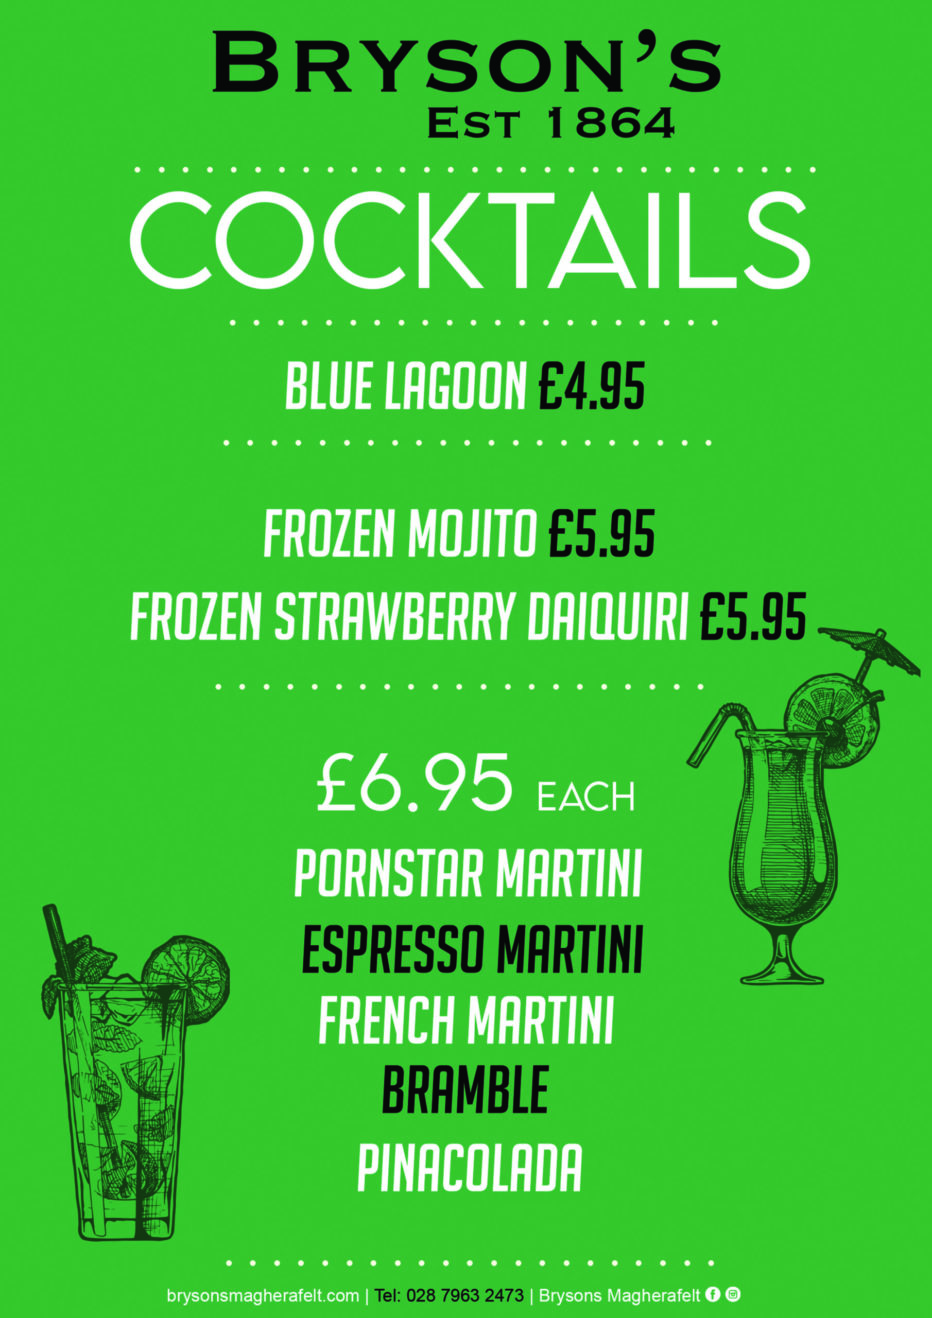 Check out our NEW cocktail menu